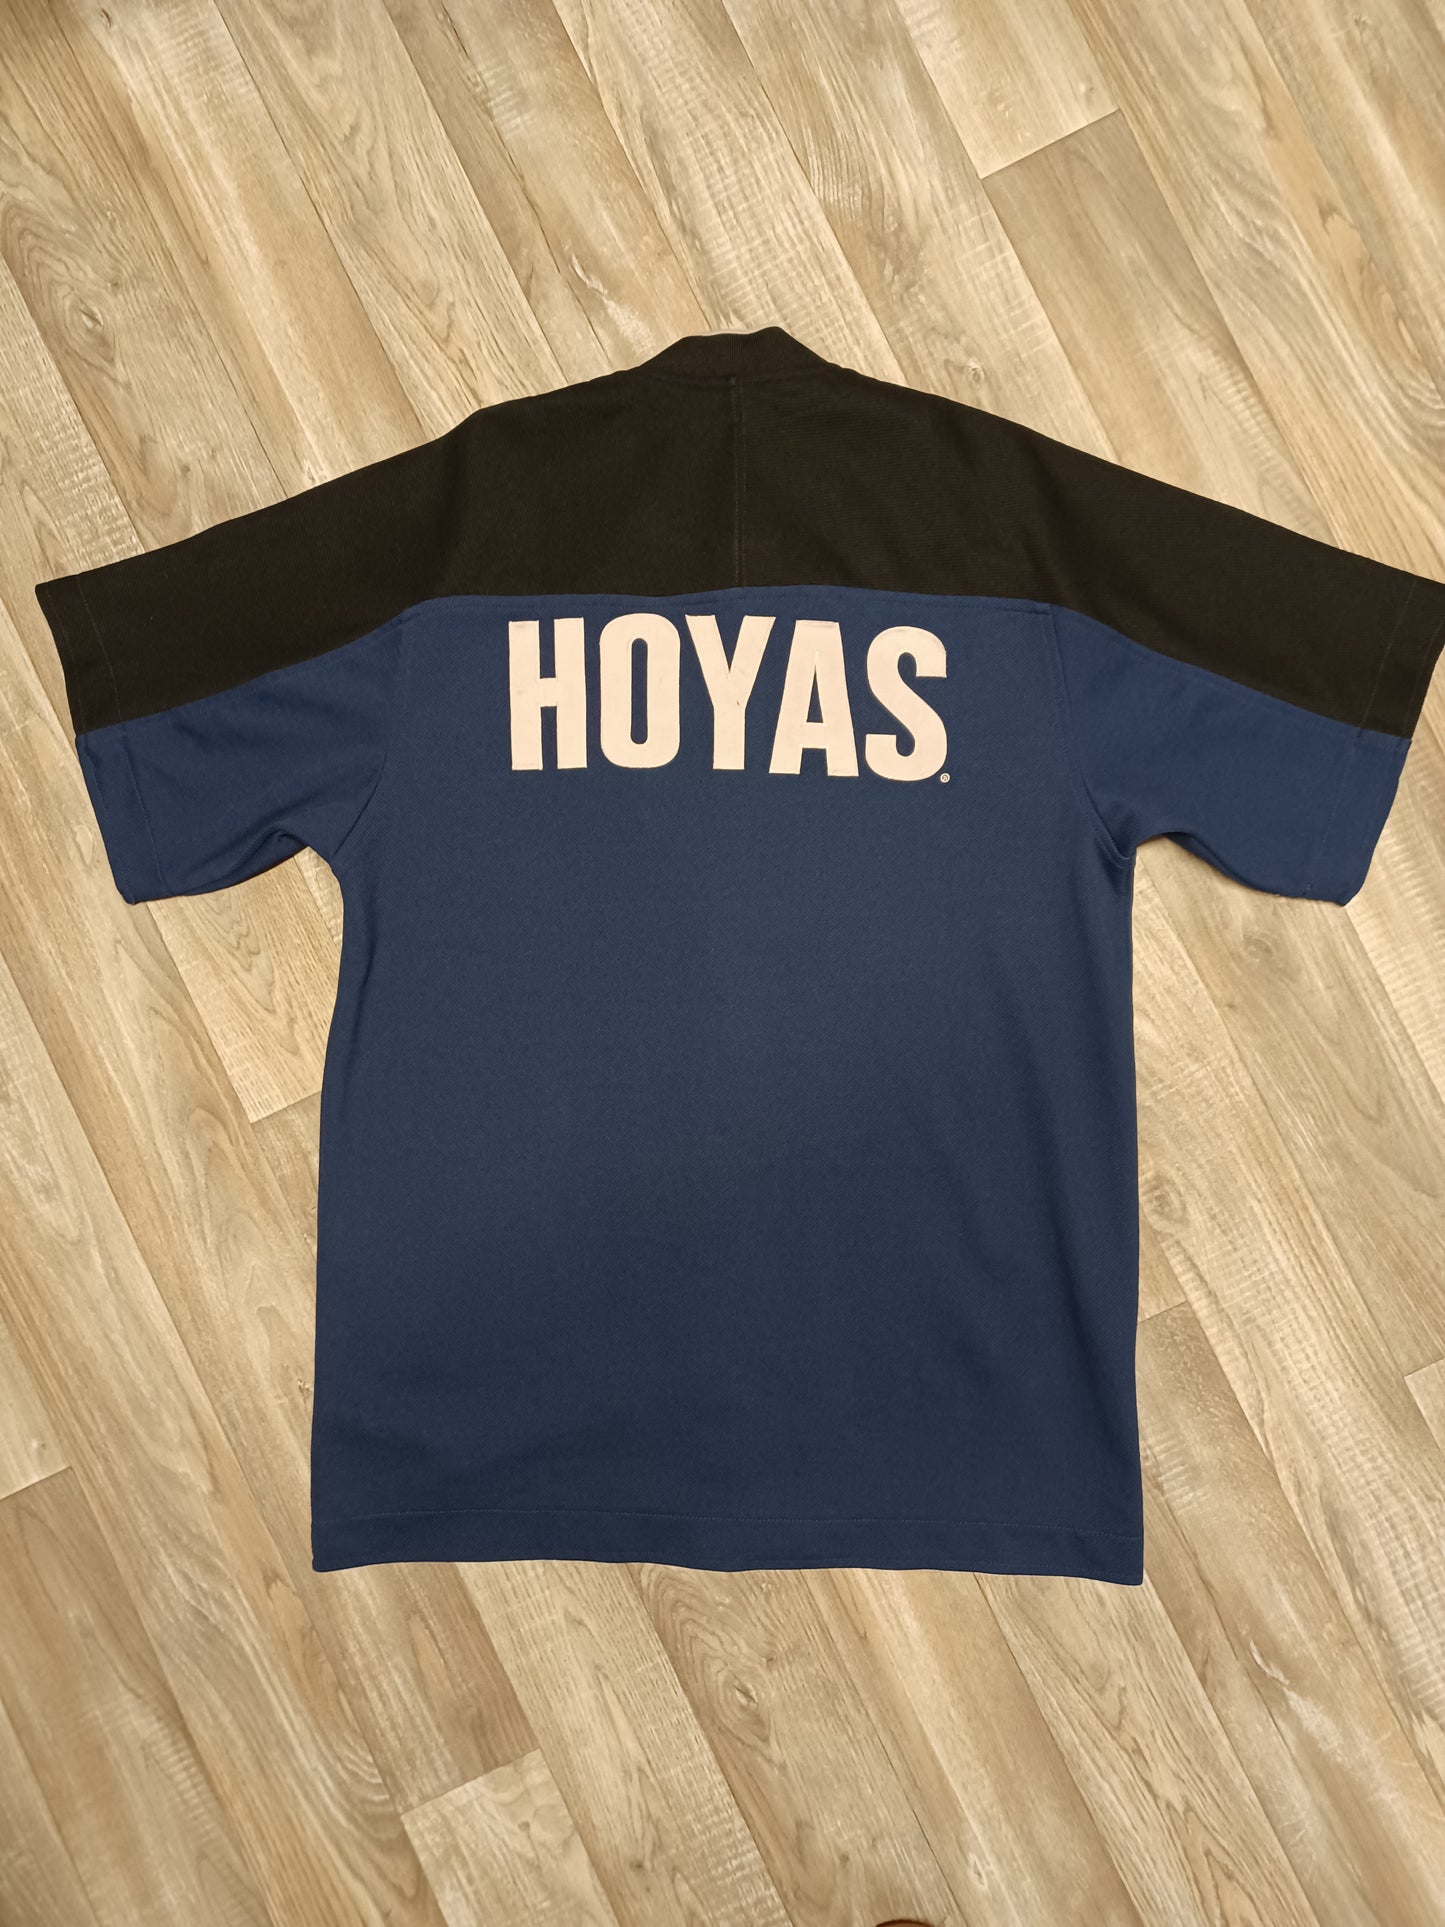 Georgetown Hoyas Warm Up Size Small